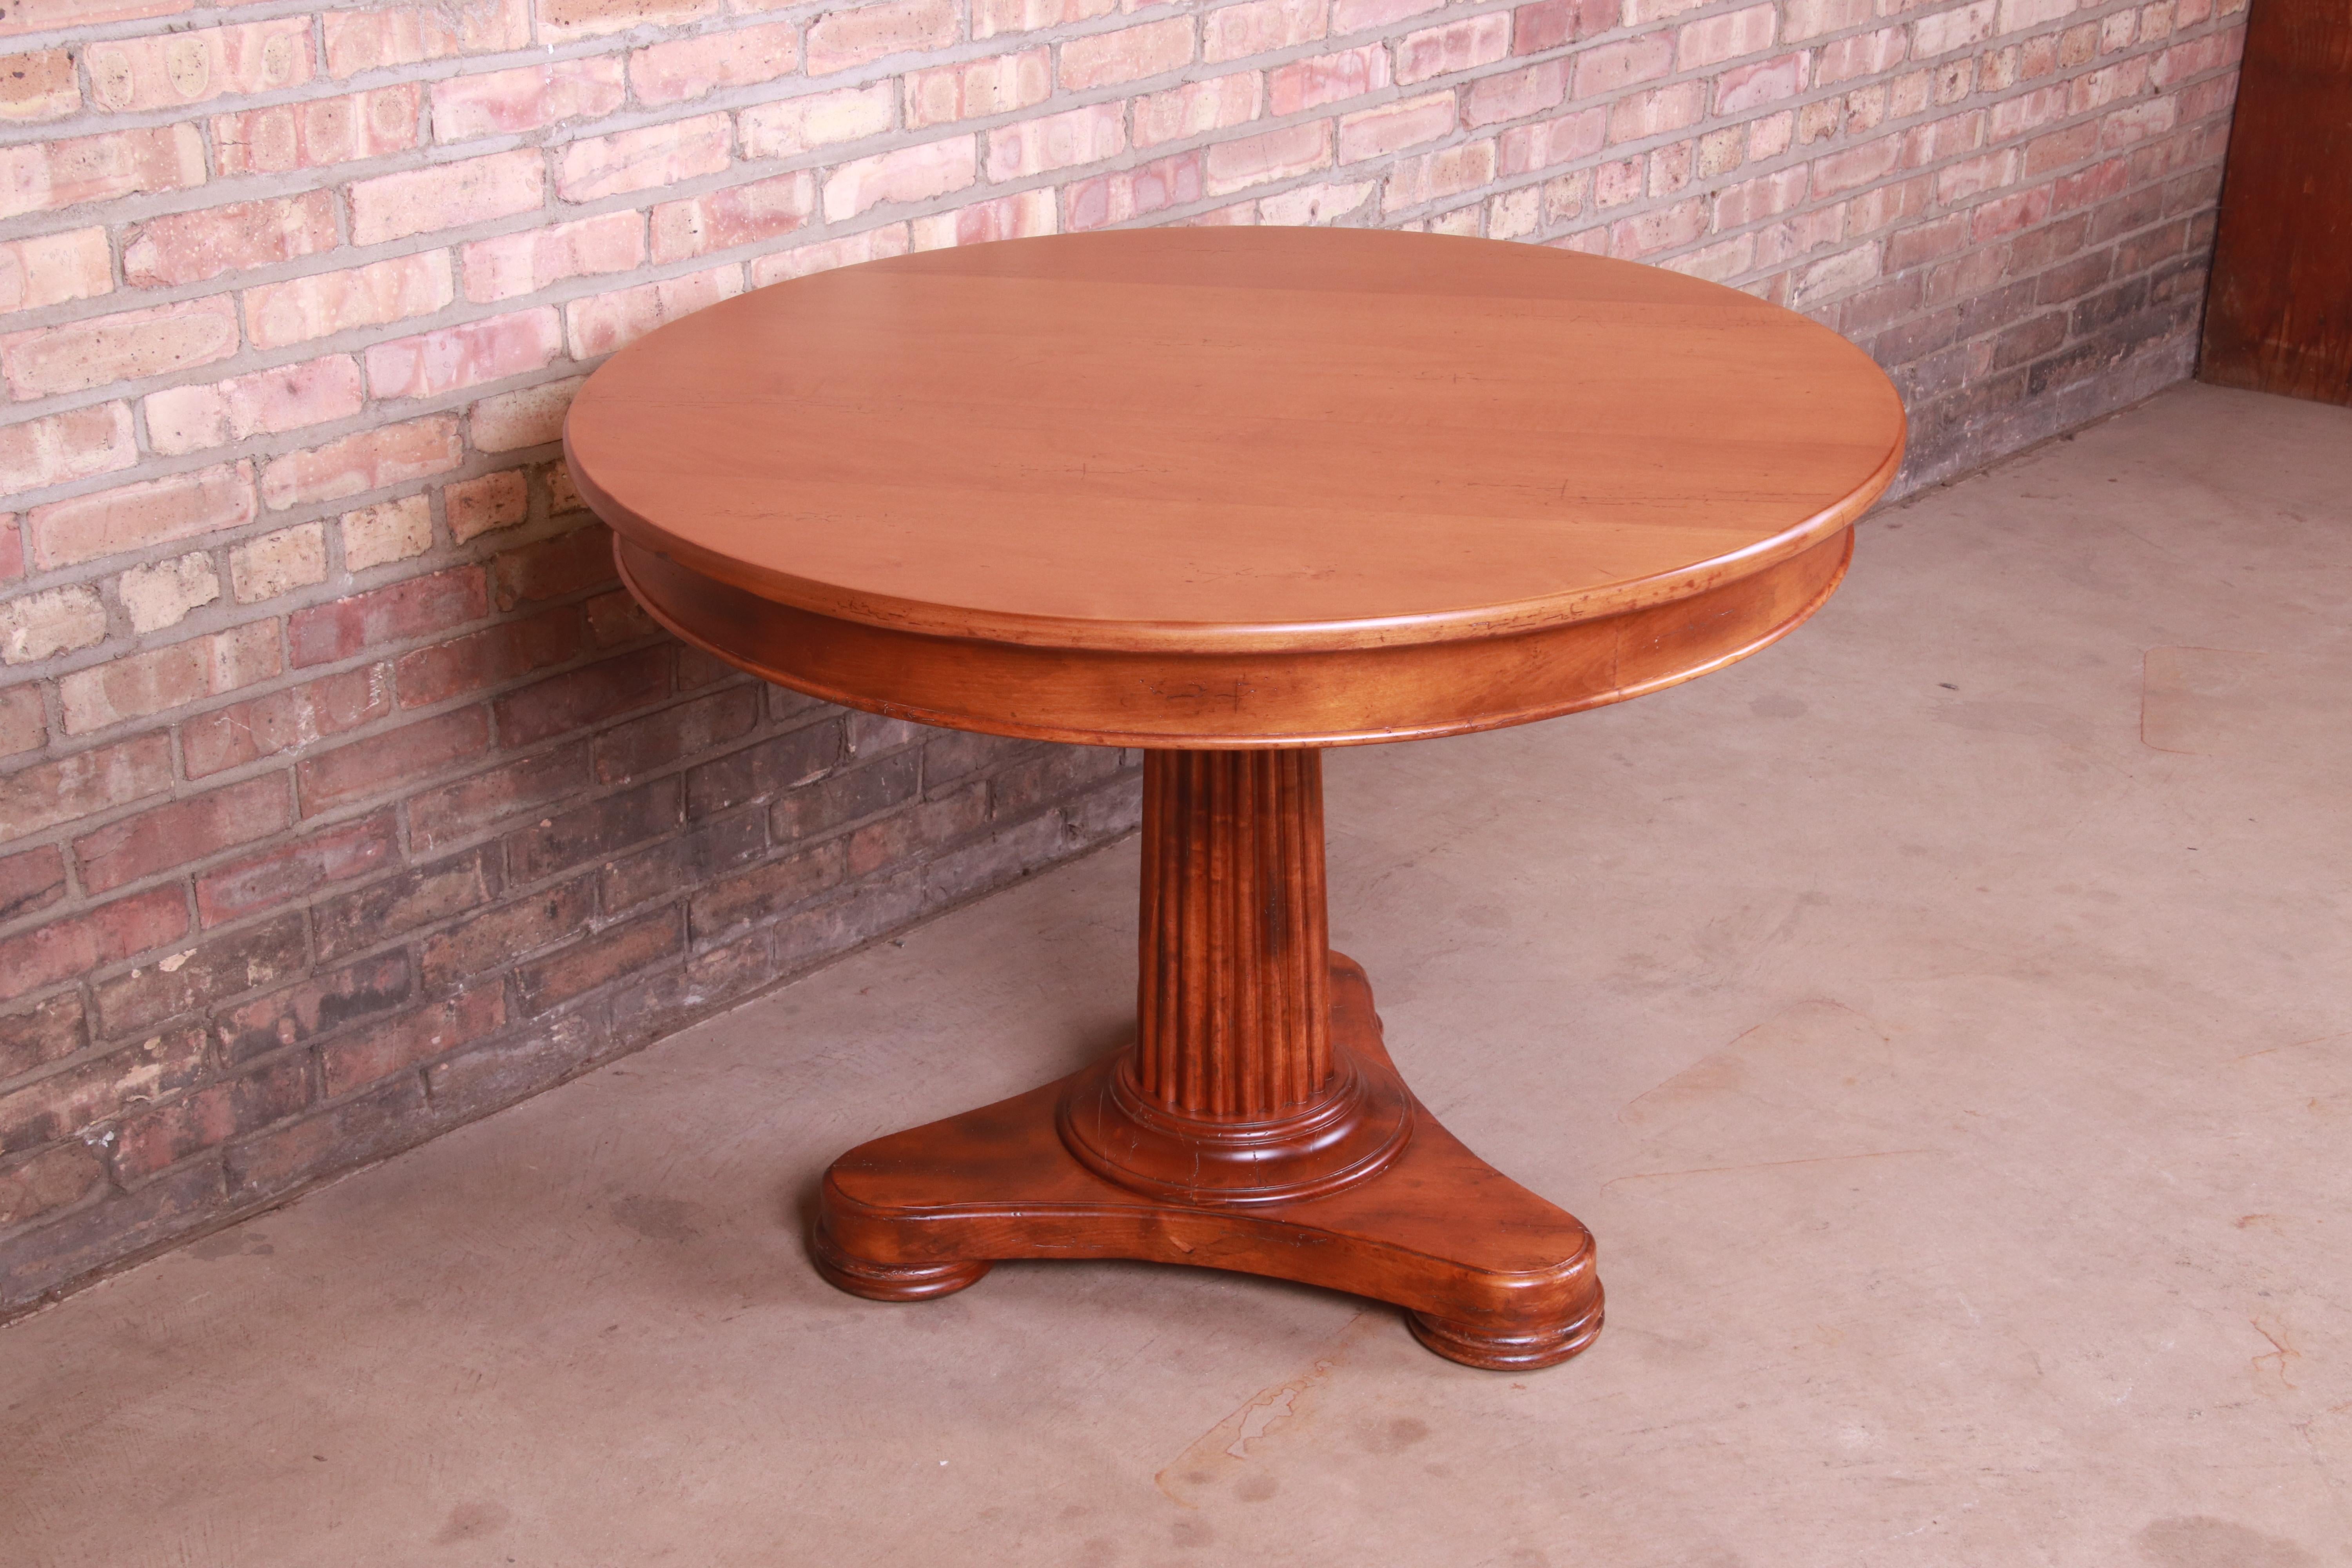 20th Century Baker Furniture Italian Empire Maple Pedestal Breakfast Table, Newly Refinished